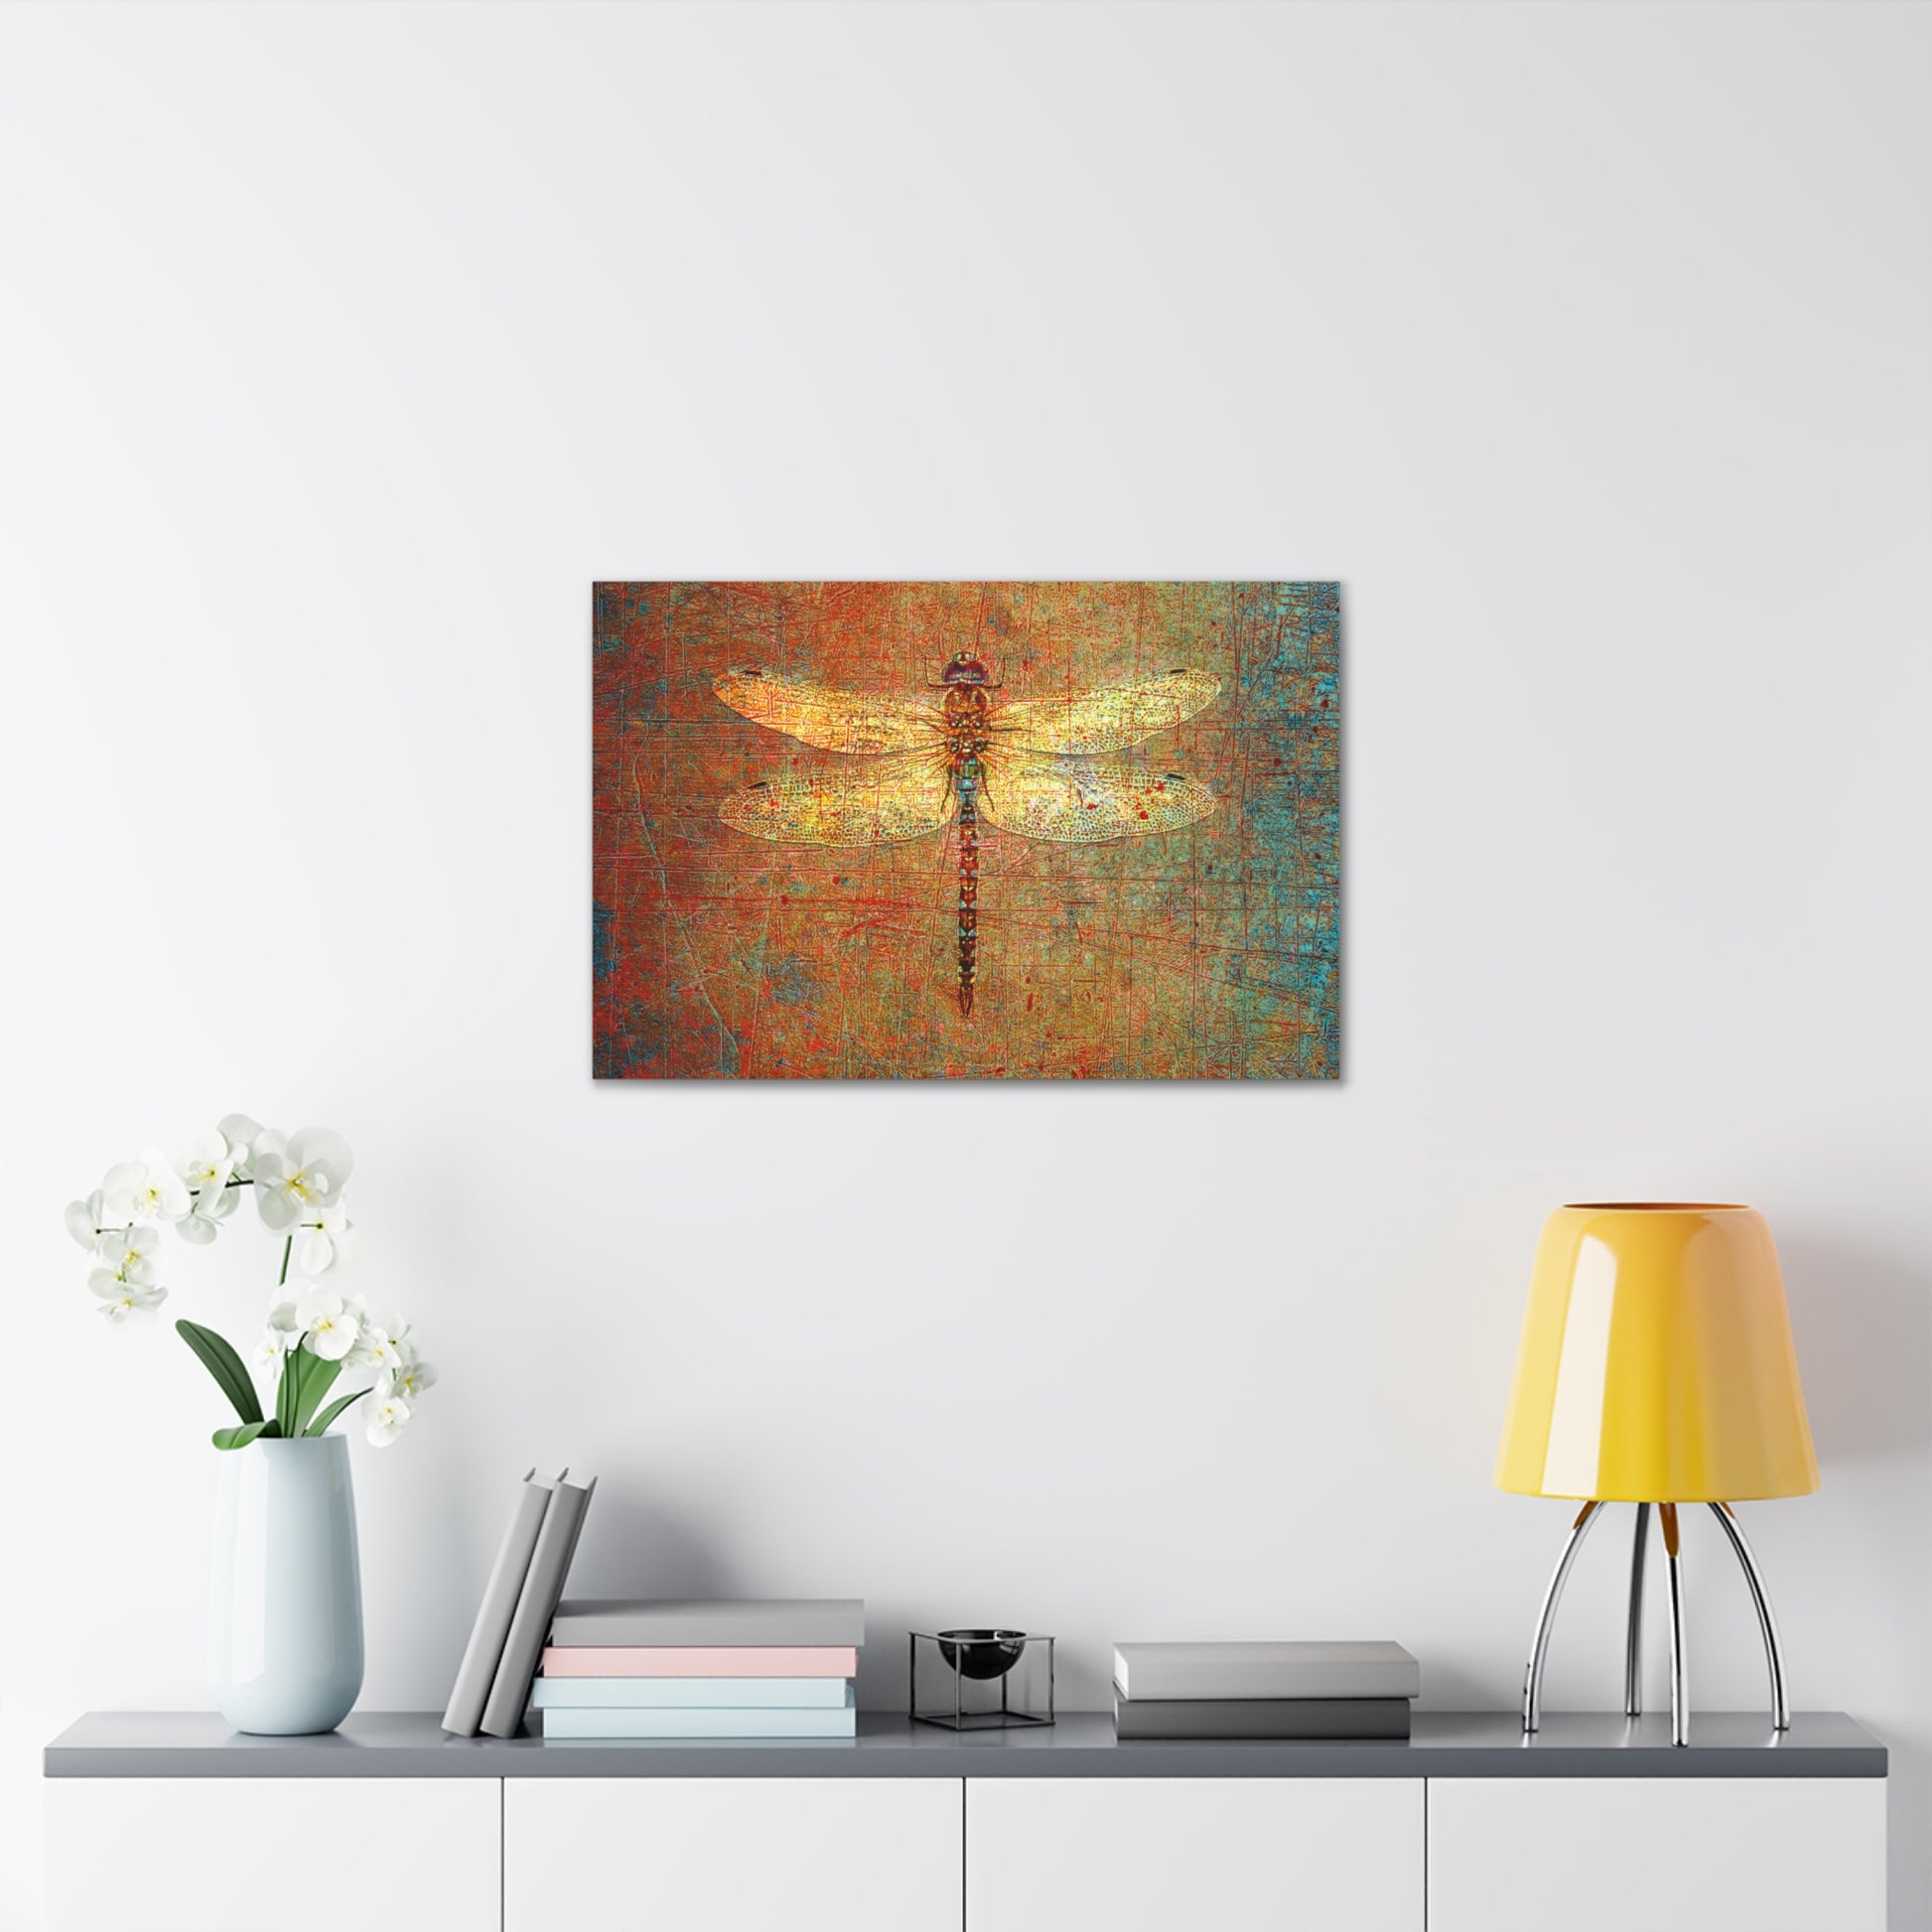 Golden Dragonfly on Distressed Orange and Green Background Print on Unframed Stretched Canvas 30x20